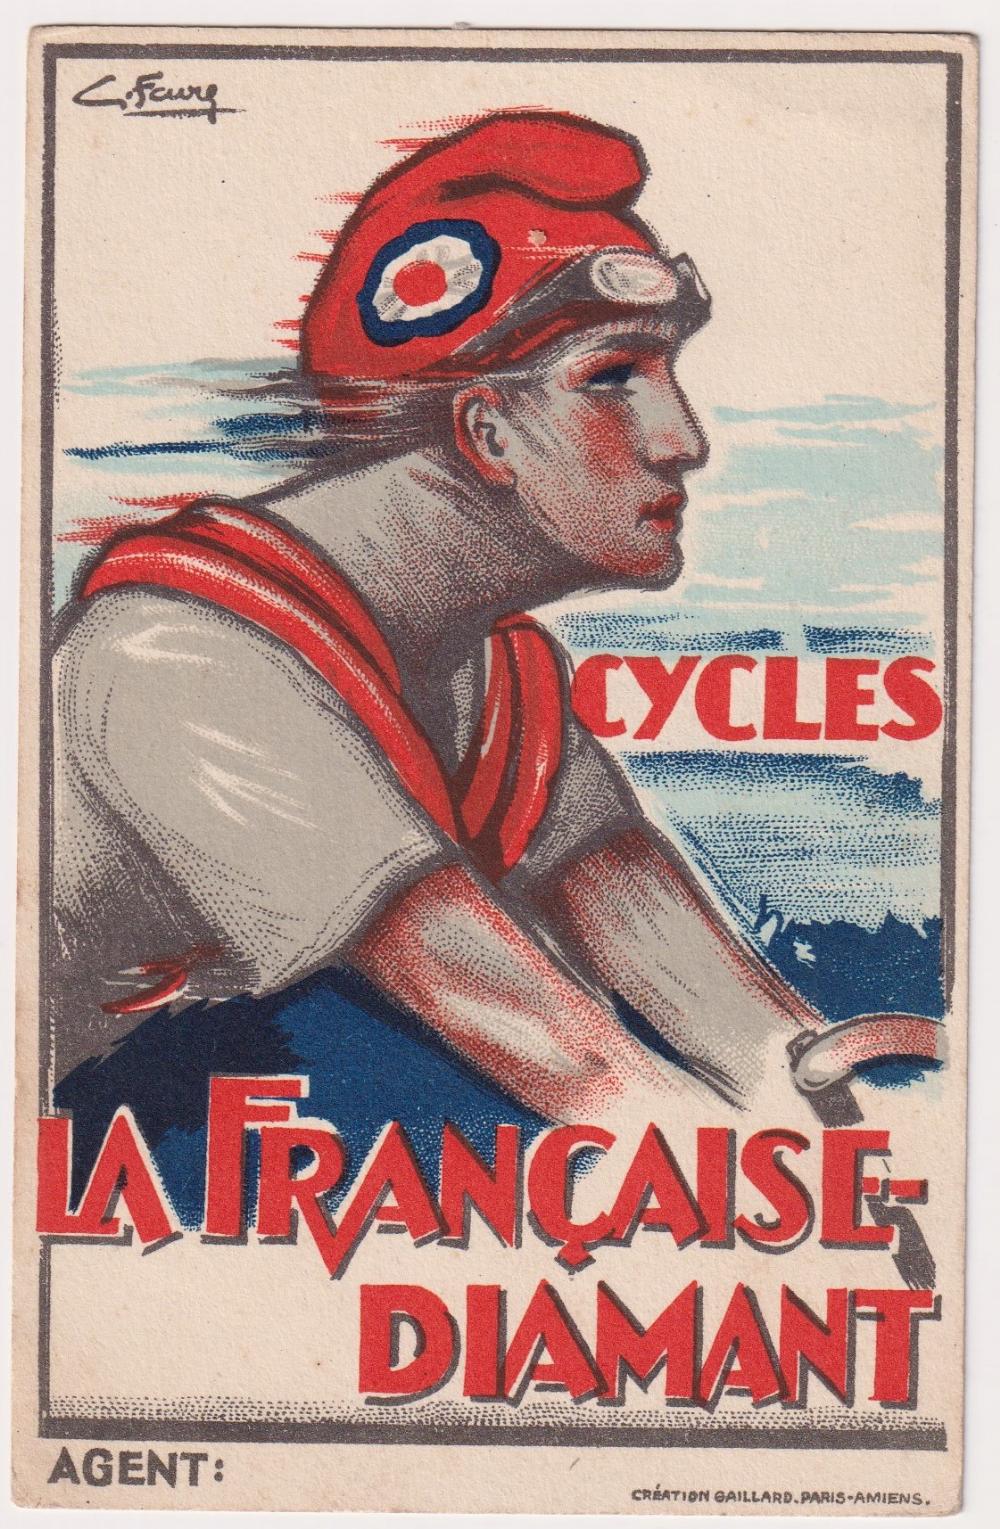 Postcards, Advertising, Cycling, La Francaise Diamant, great Patriotic Image by Feury (gd/vg, slight